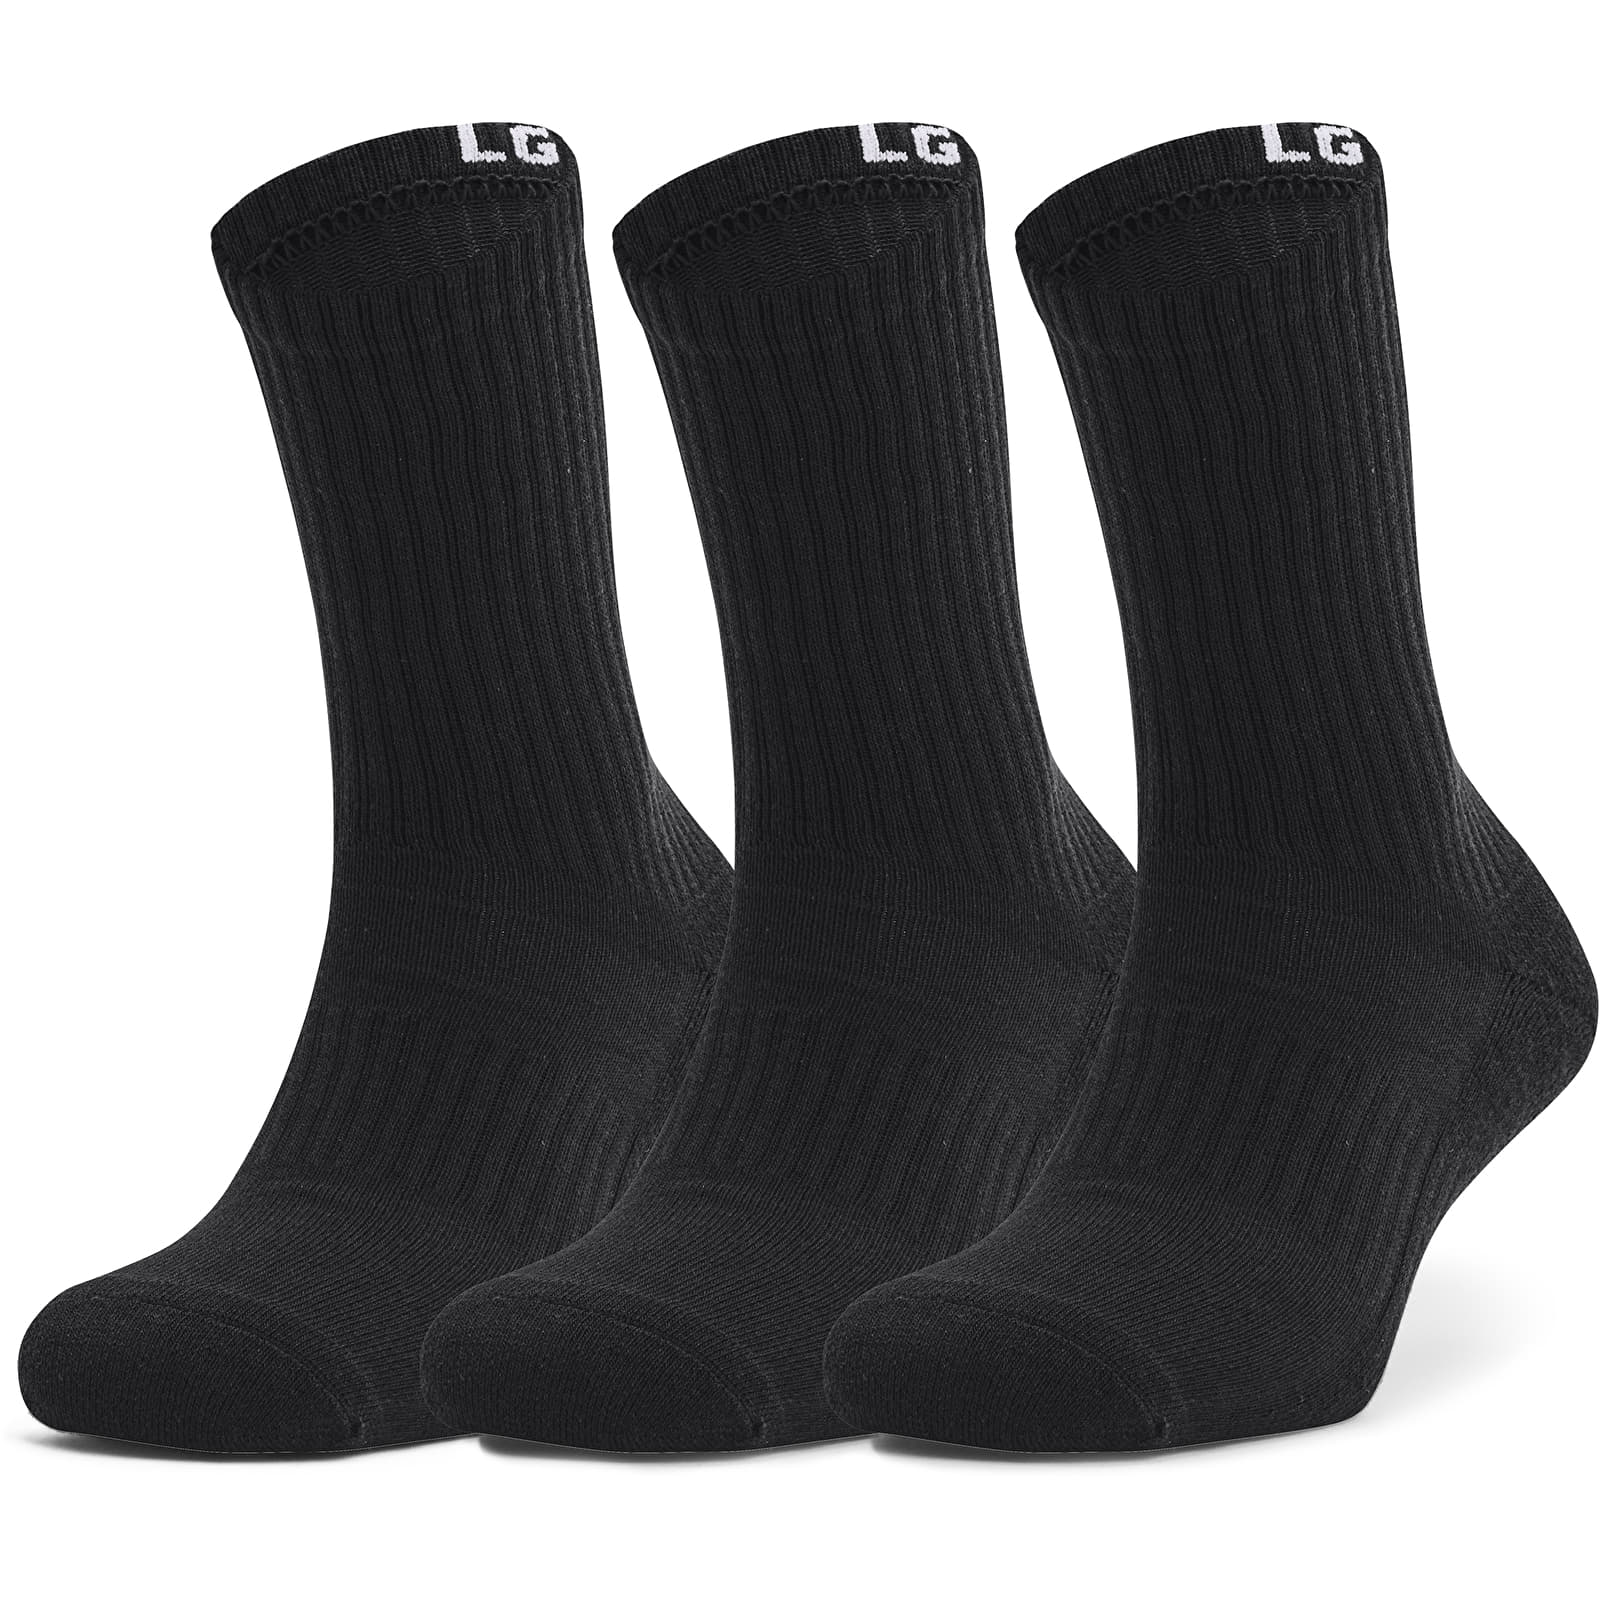 Accessories Under Armour Core Crew 3 Pack Socks Black/ White